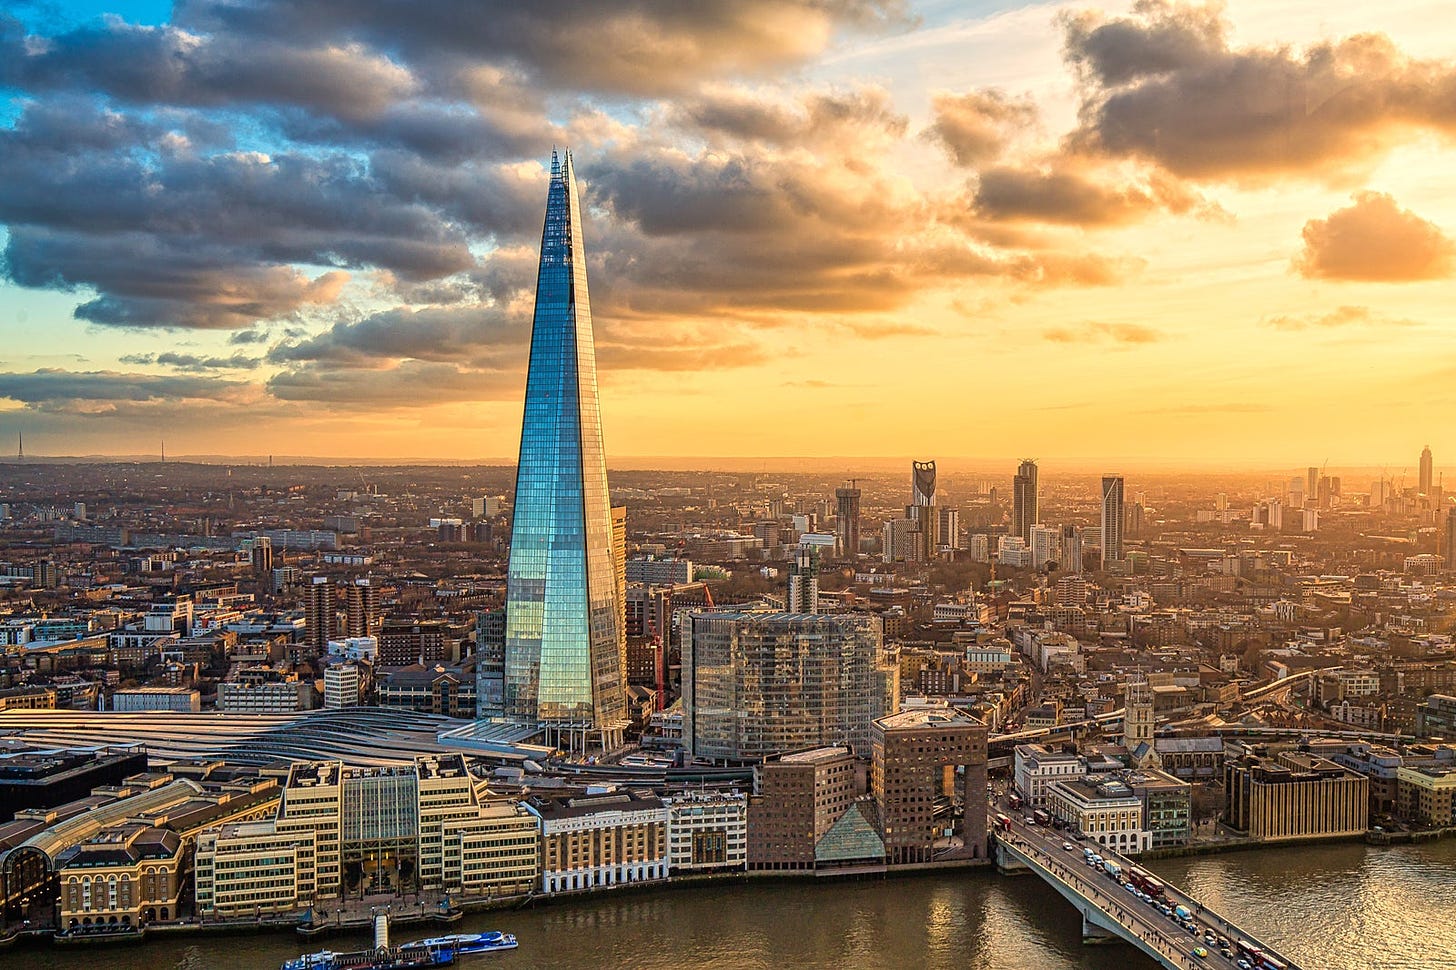 The Shard in London - The Tallest Building in Britain – Go Guides